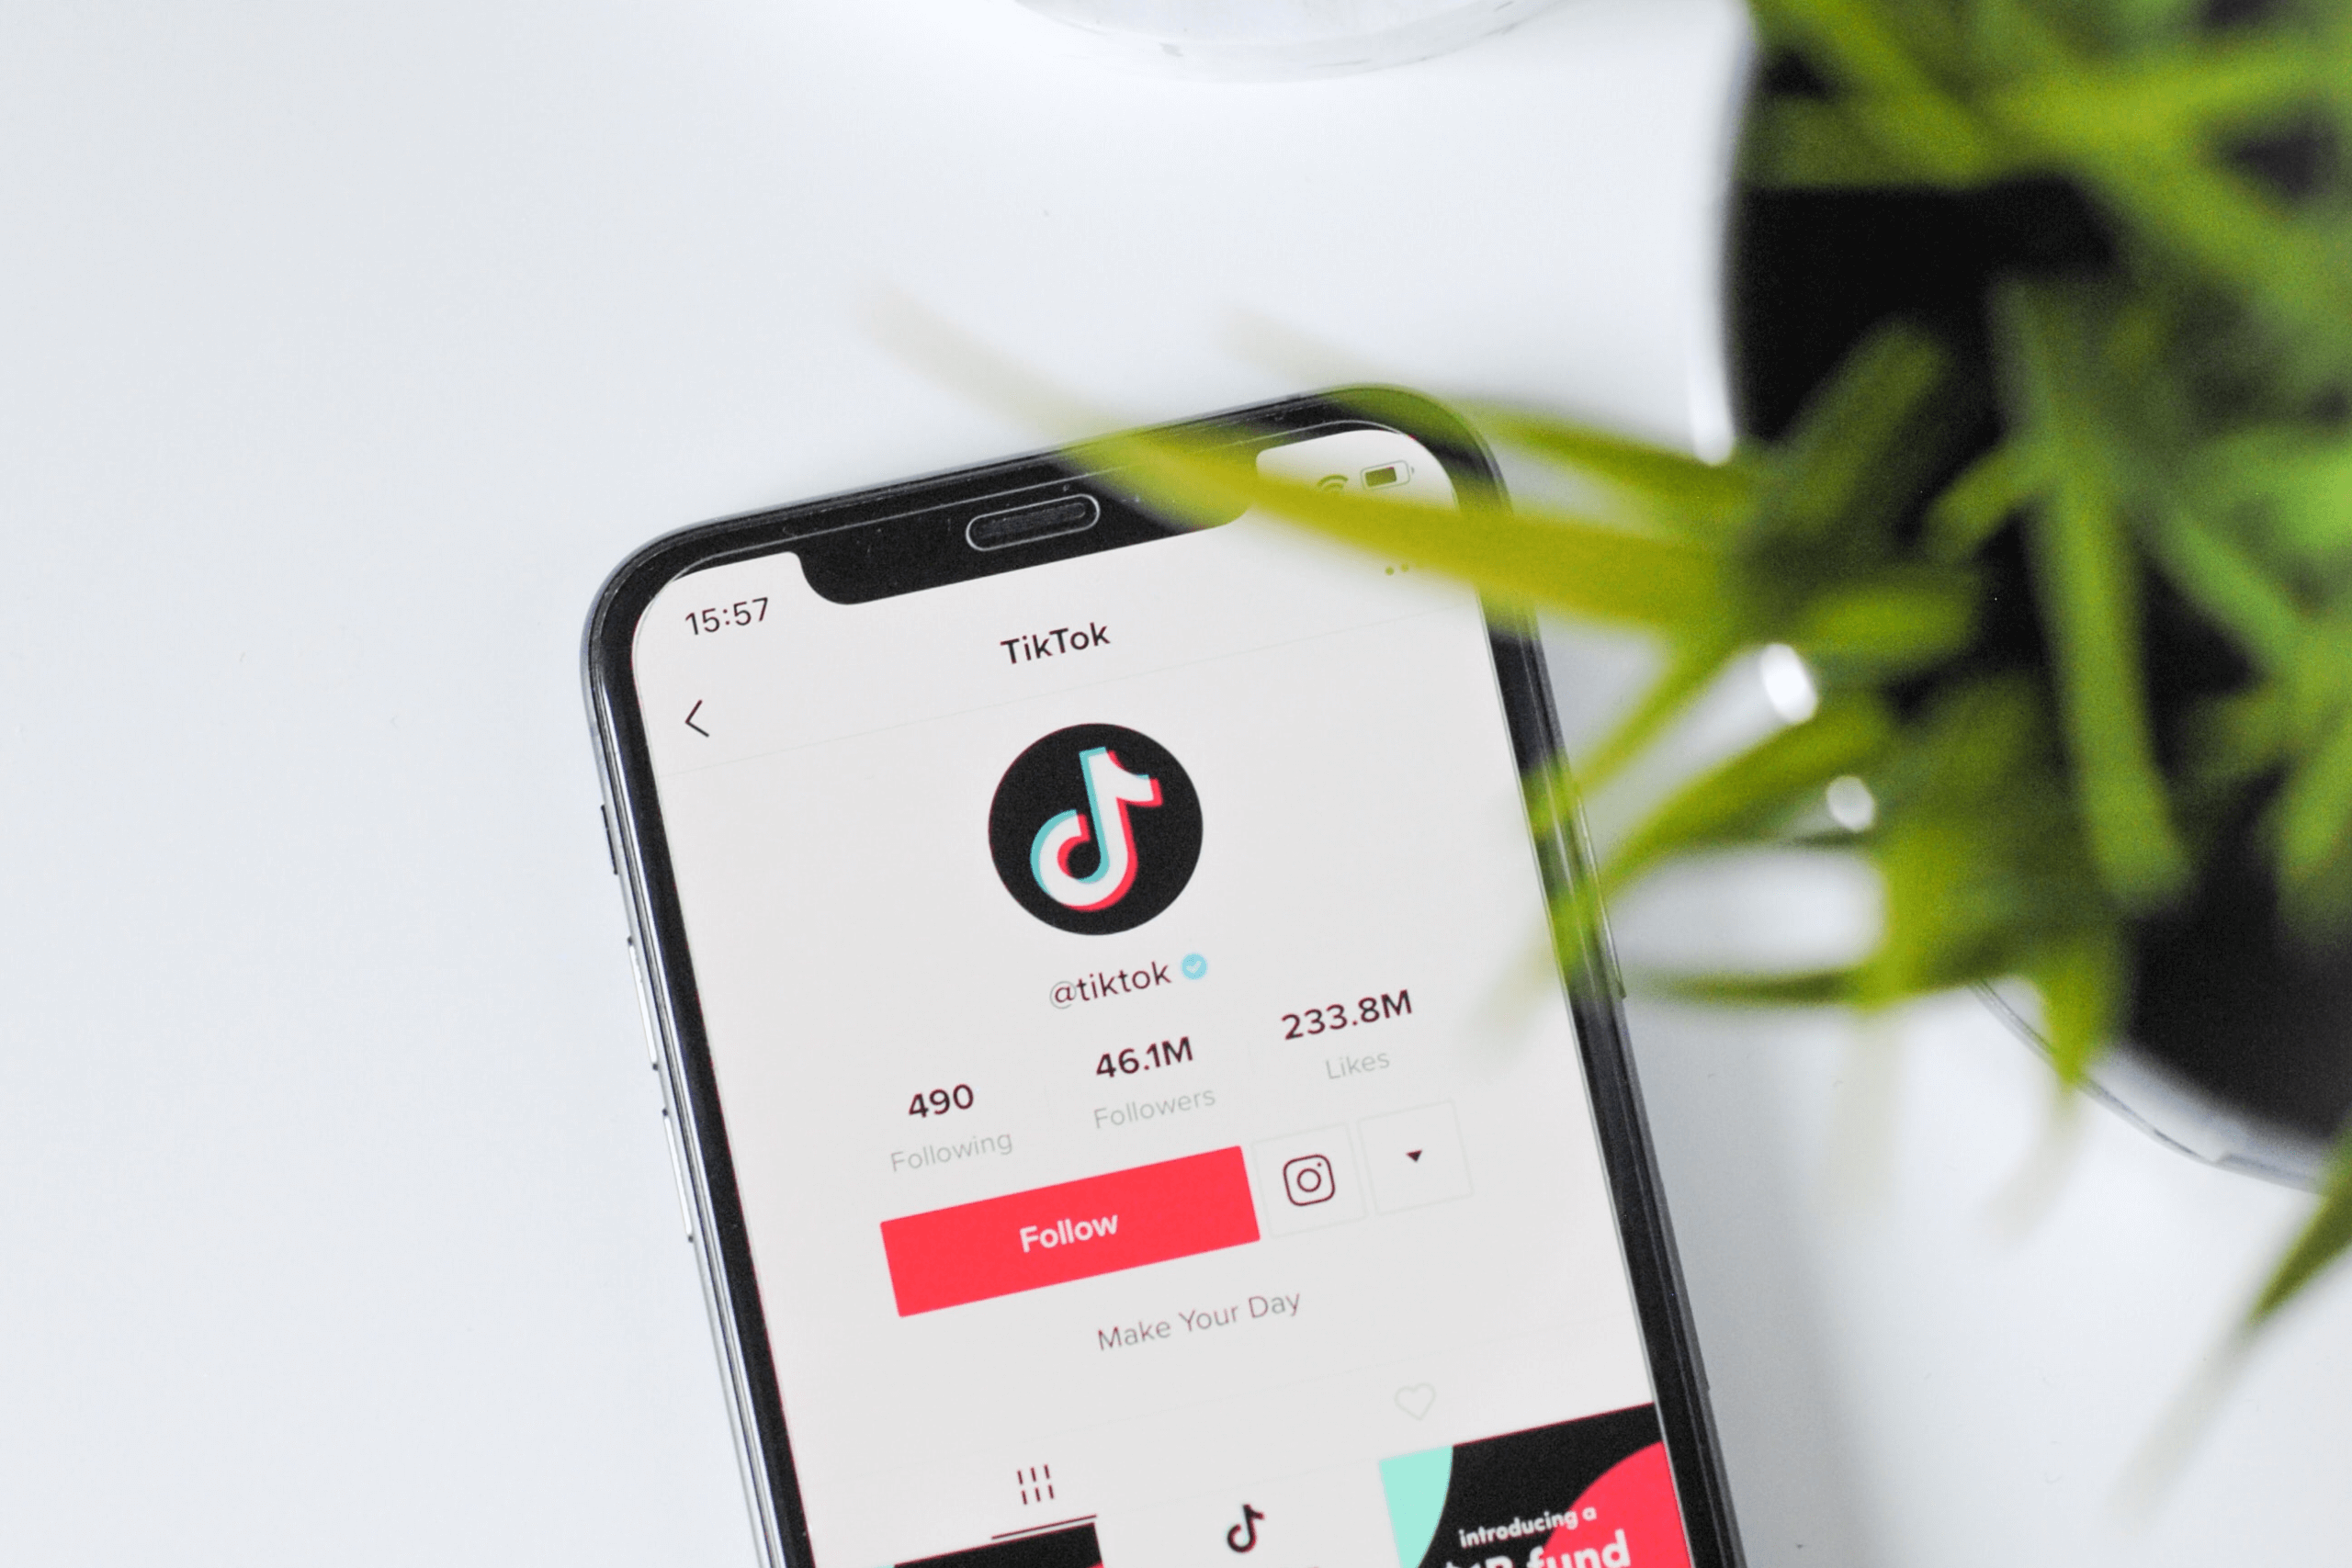 Digital Marketing Experts in Colchester: Growing Your TikTok